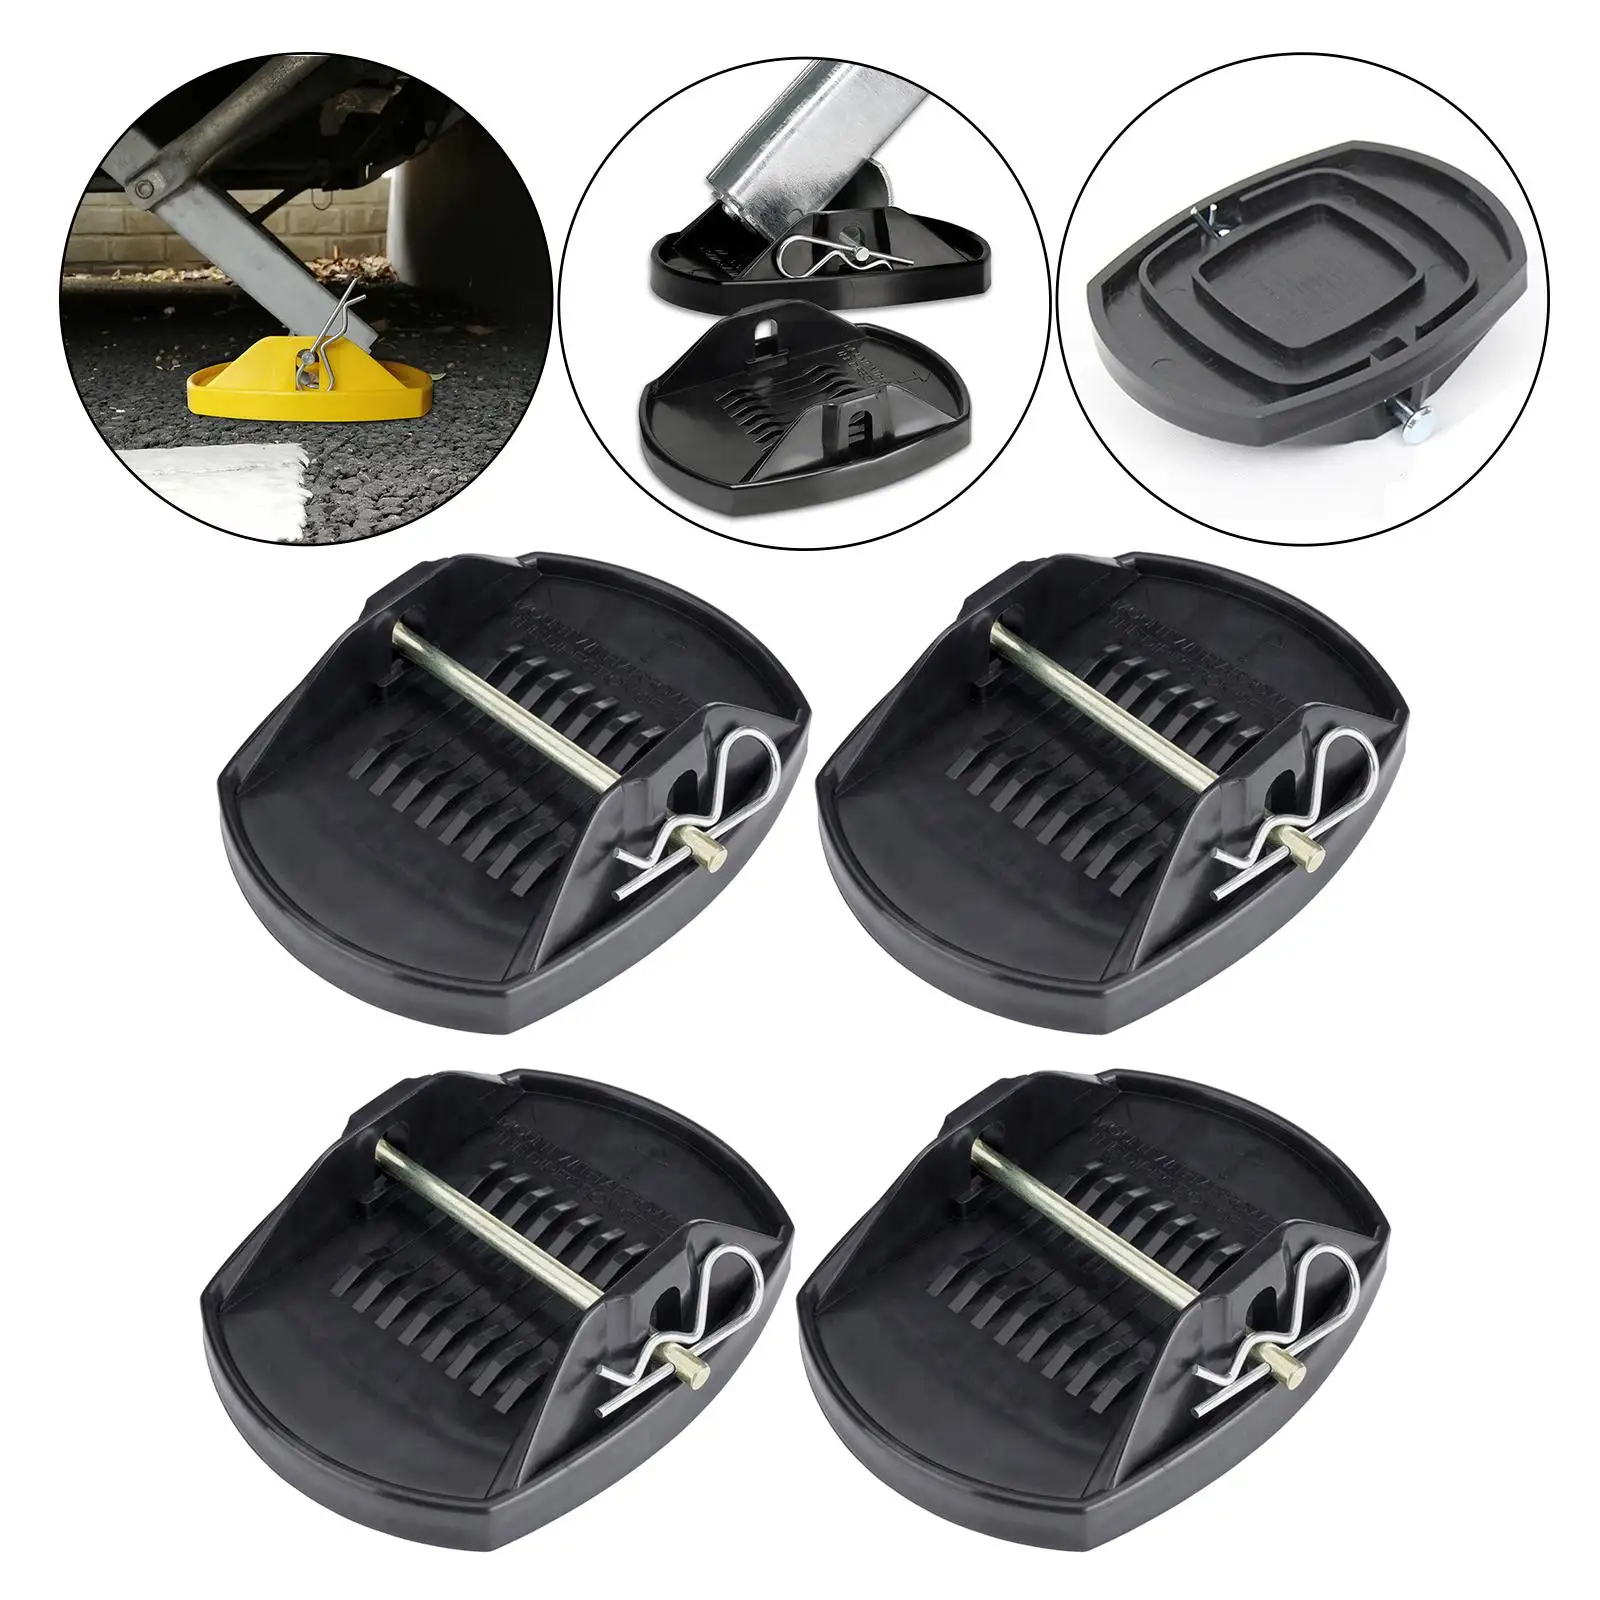 4 Pieces Pads, Parking Auxiliary Balance Wheel Foot Leg Support , Accessories Adapter Outrigger for Trailers RV